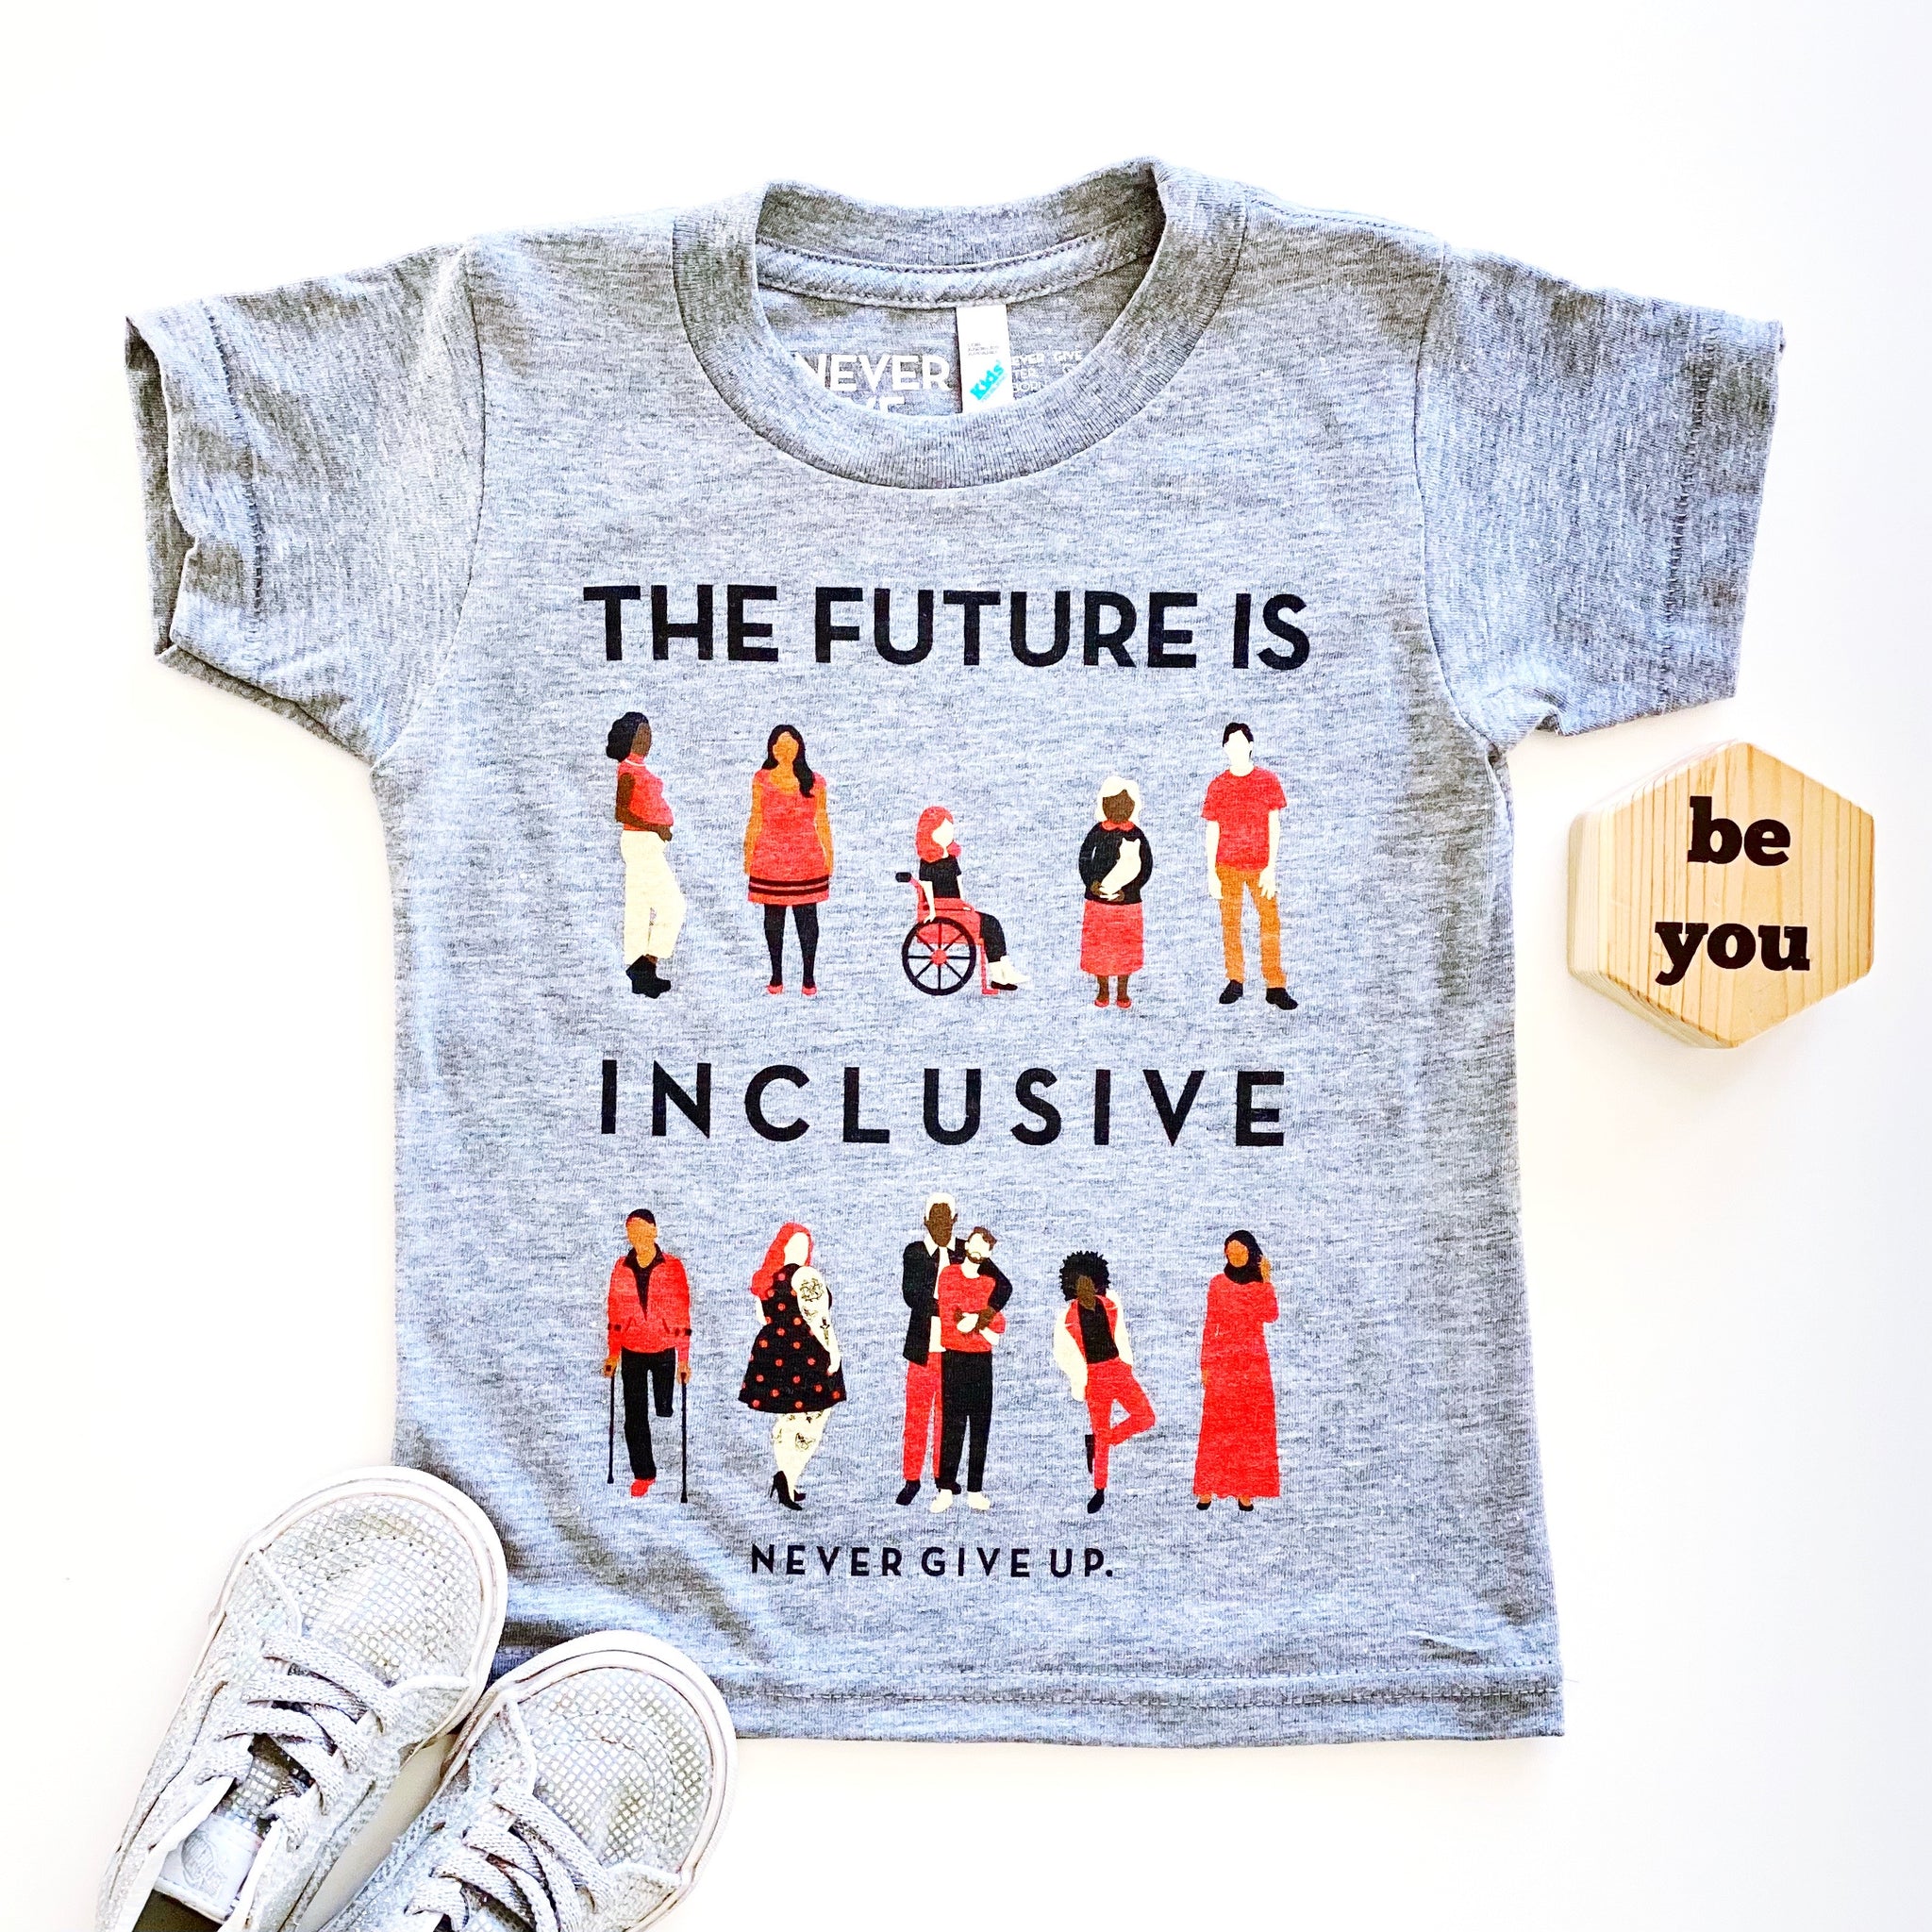 INCLUSIVE GIVE IS THE SHOP UP. FUTURE - NEVER